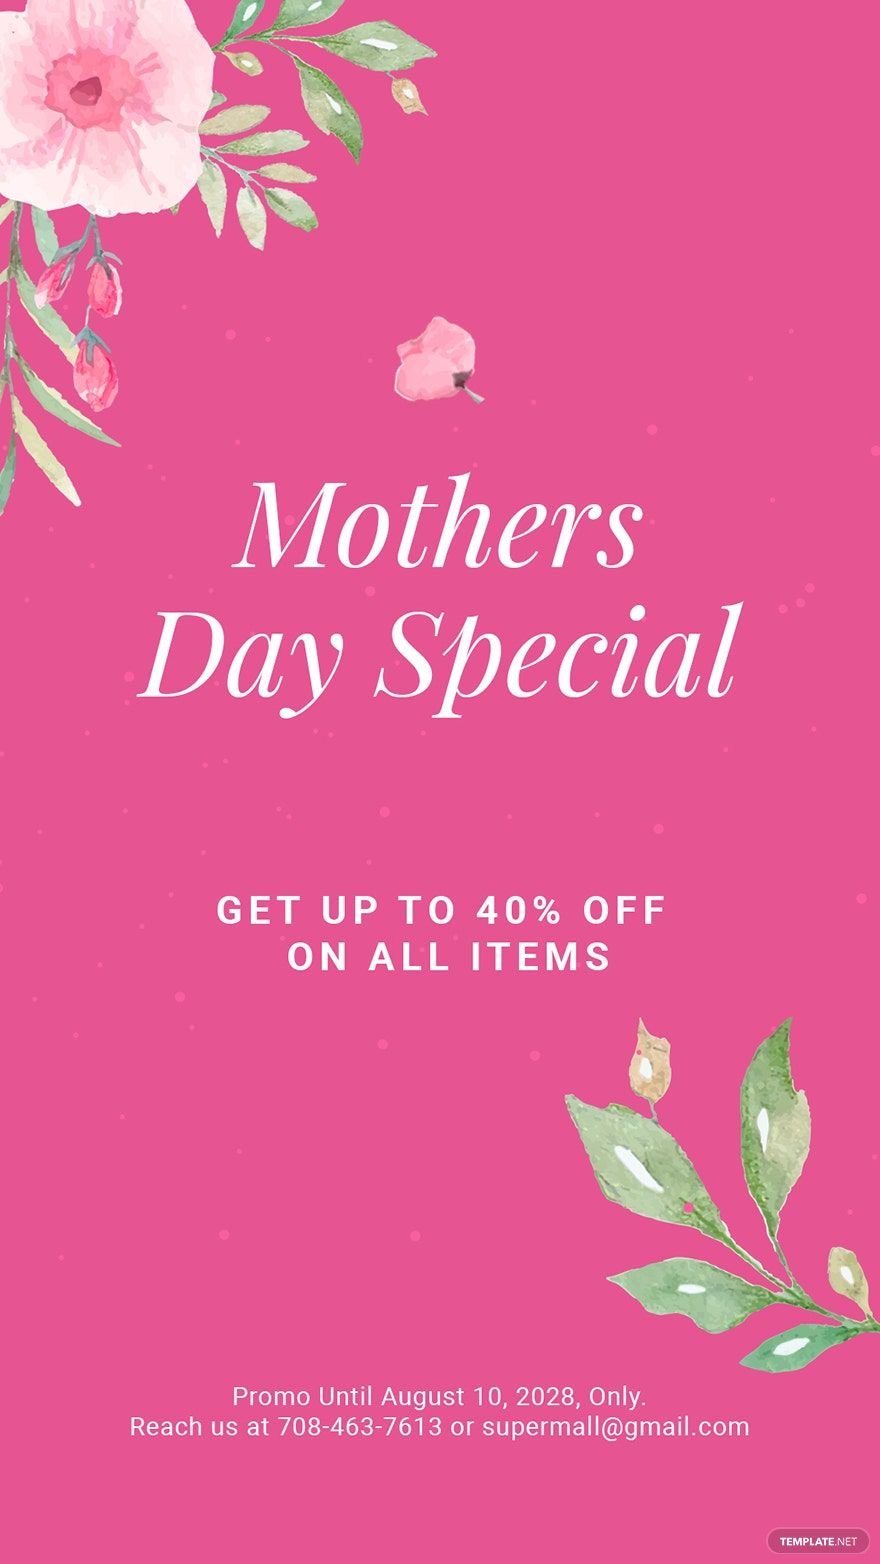 Mothers Day Special Sale Whatsapp Image Template in PSD